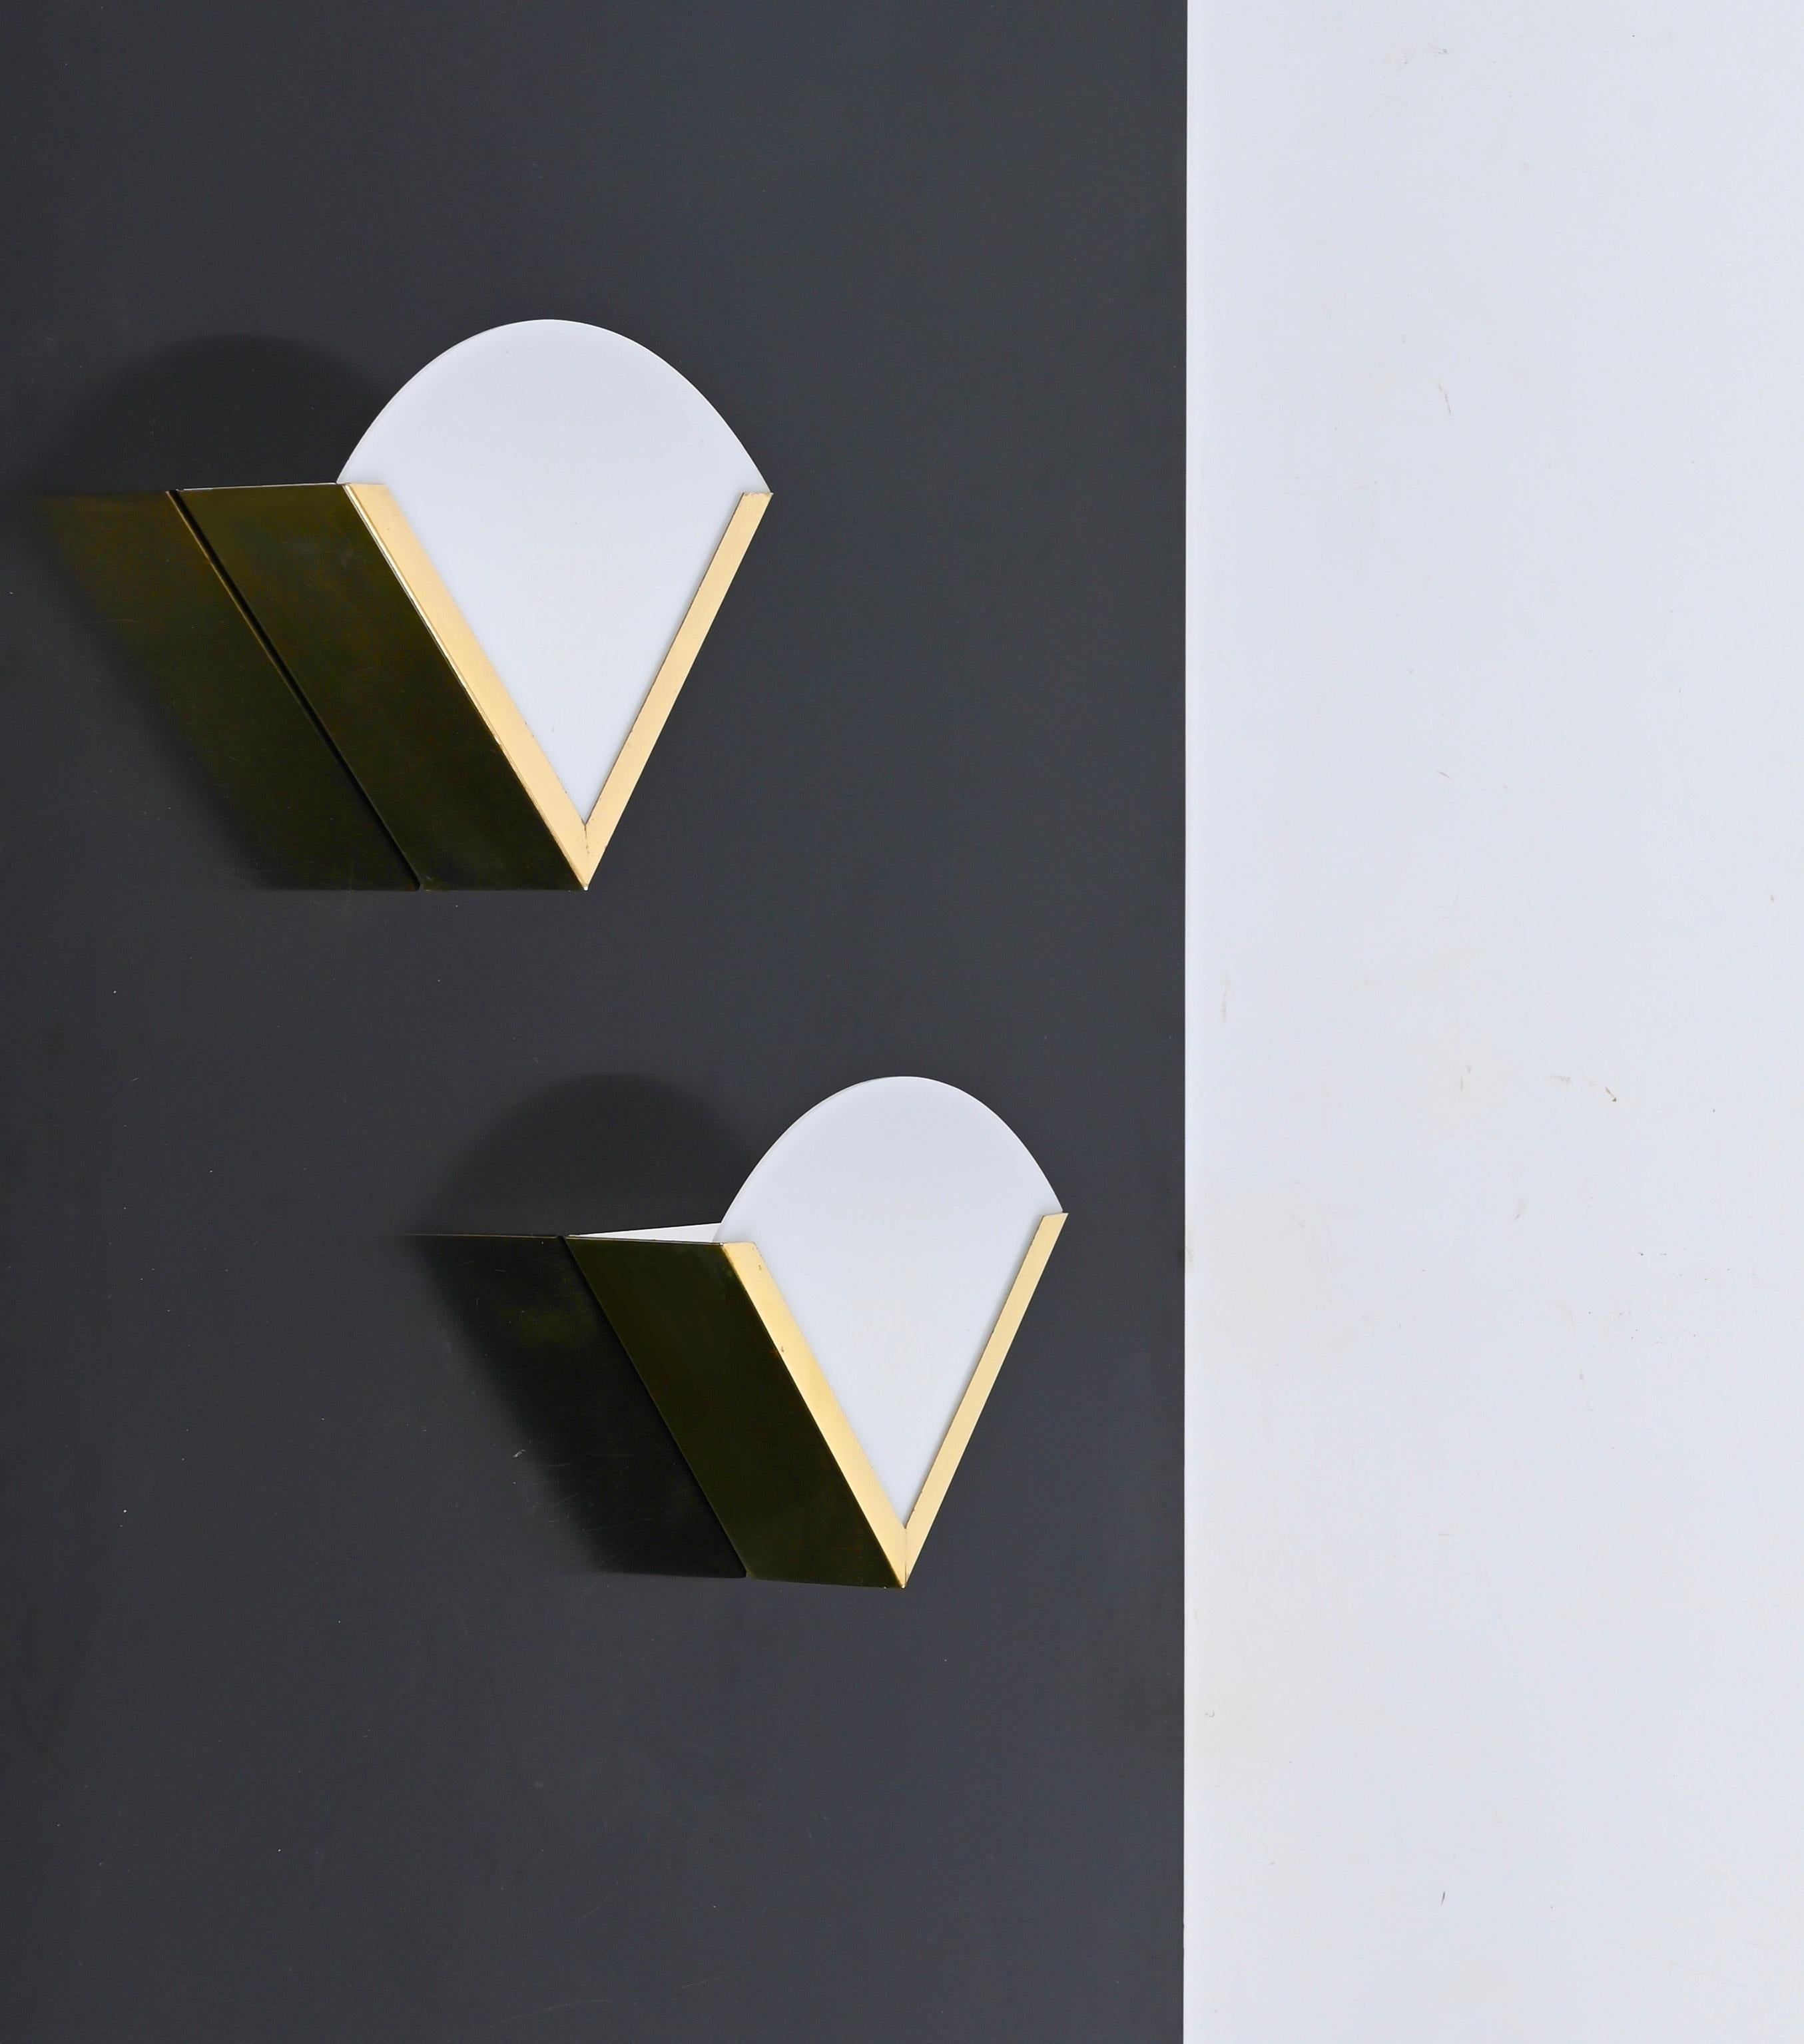 Gorgeous Mid-Century sconces made in brass and white perspex. These elegant wall lamps were designed in Italy during the 1970s. 

The sconces feature a triangular body fully made in brass with a white perspex shade. The contrast between the gold of